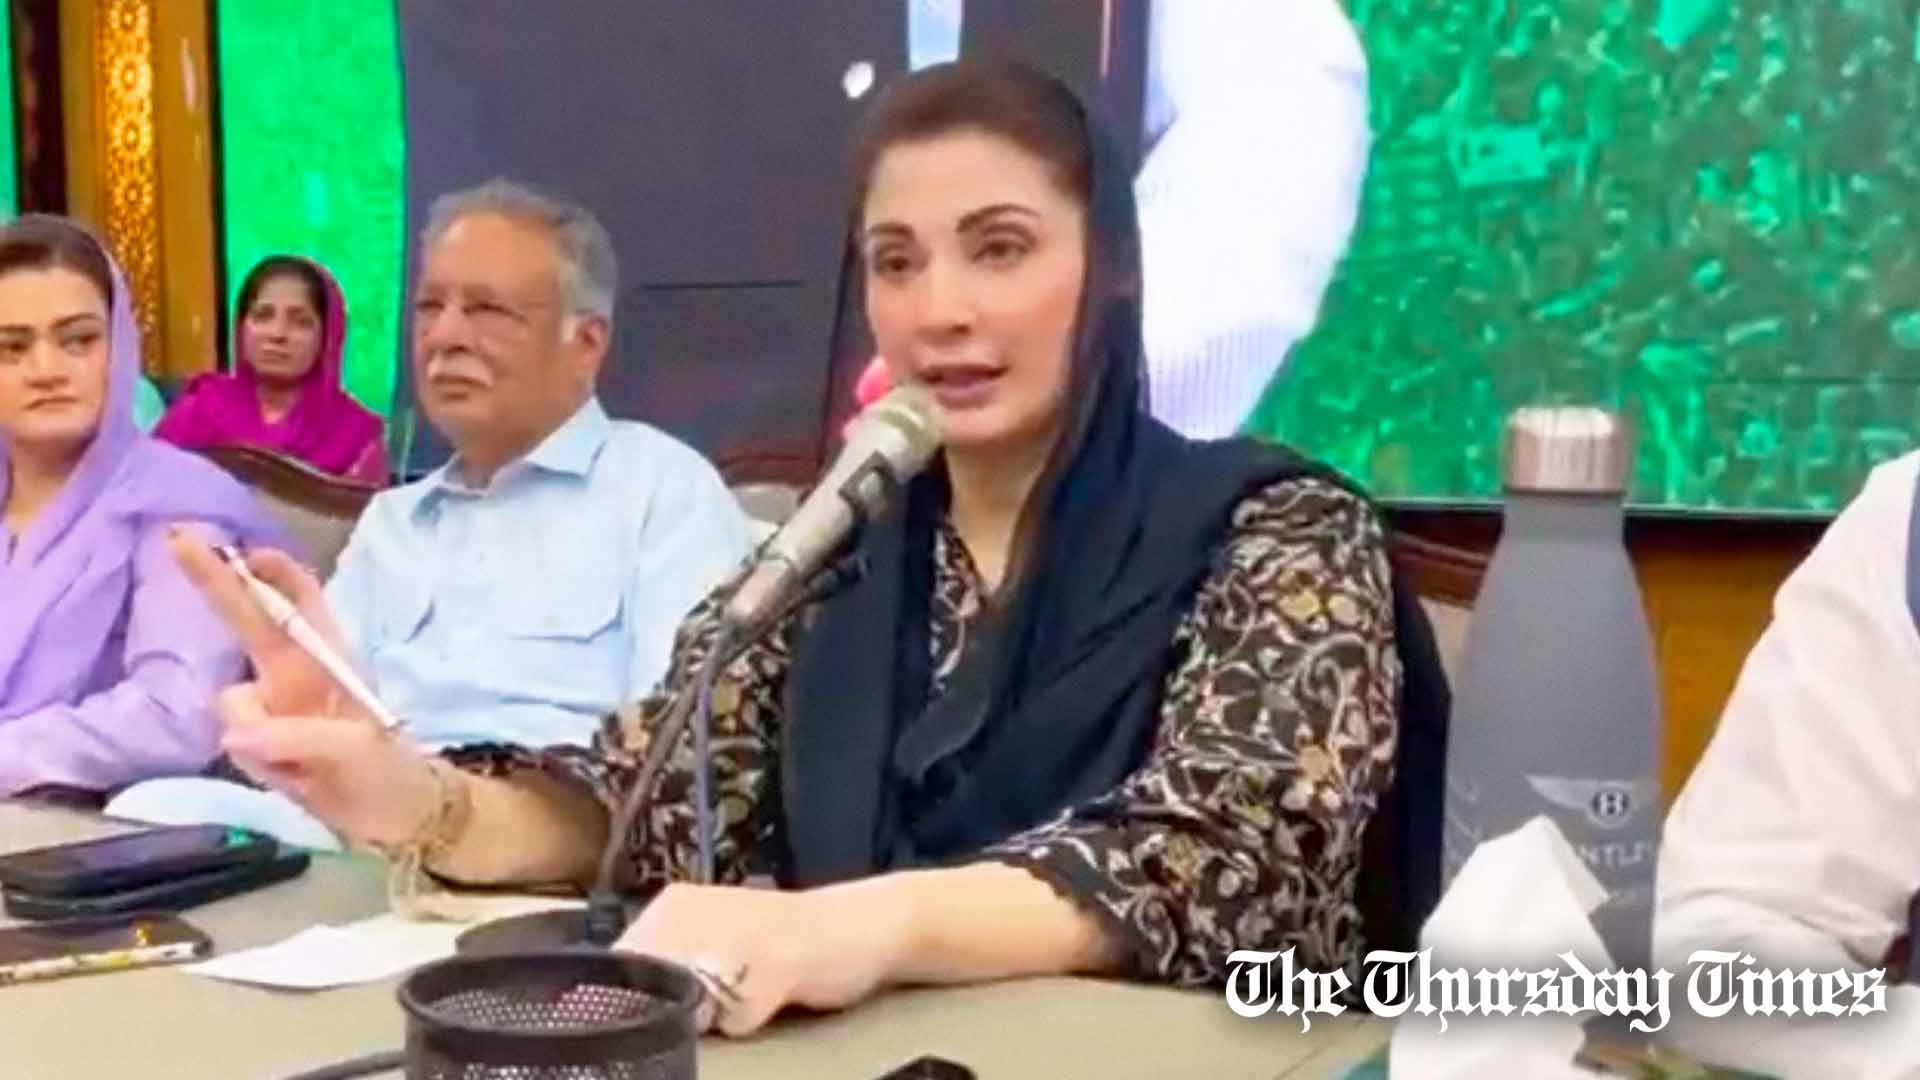 A file photo is shown of PML(N) senior vice president Maryam Nawaz addressing a party convention at Lahore. — FILE/THE THURSDAY TIMES